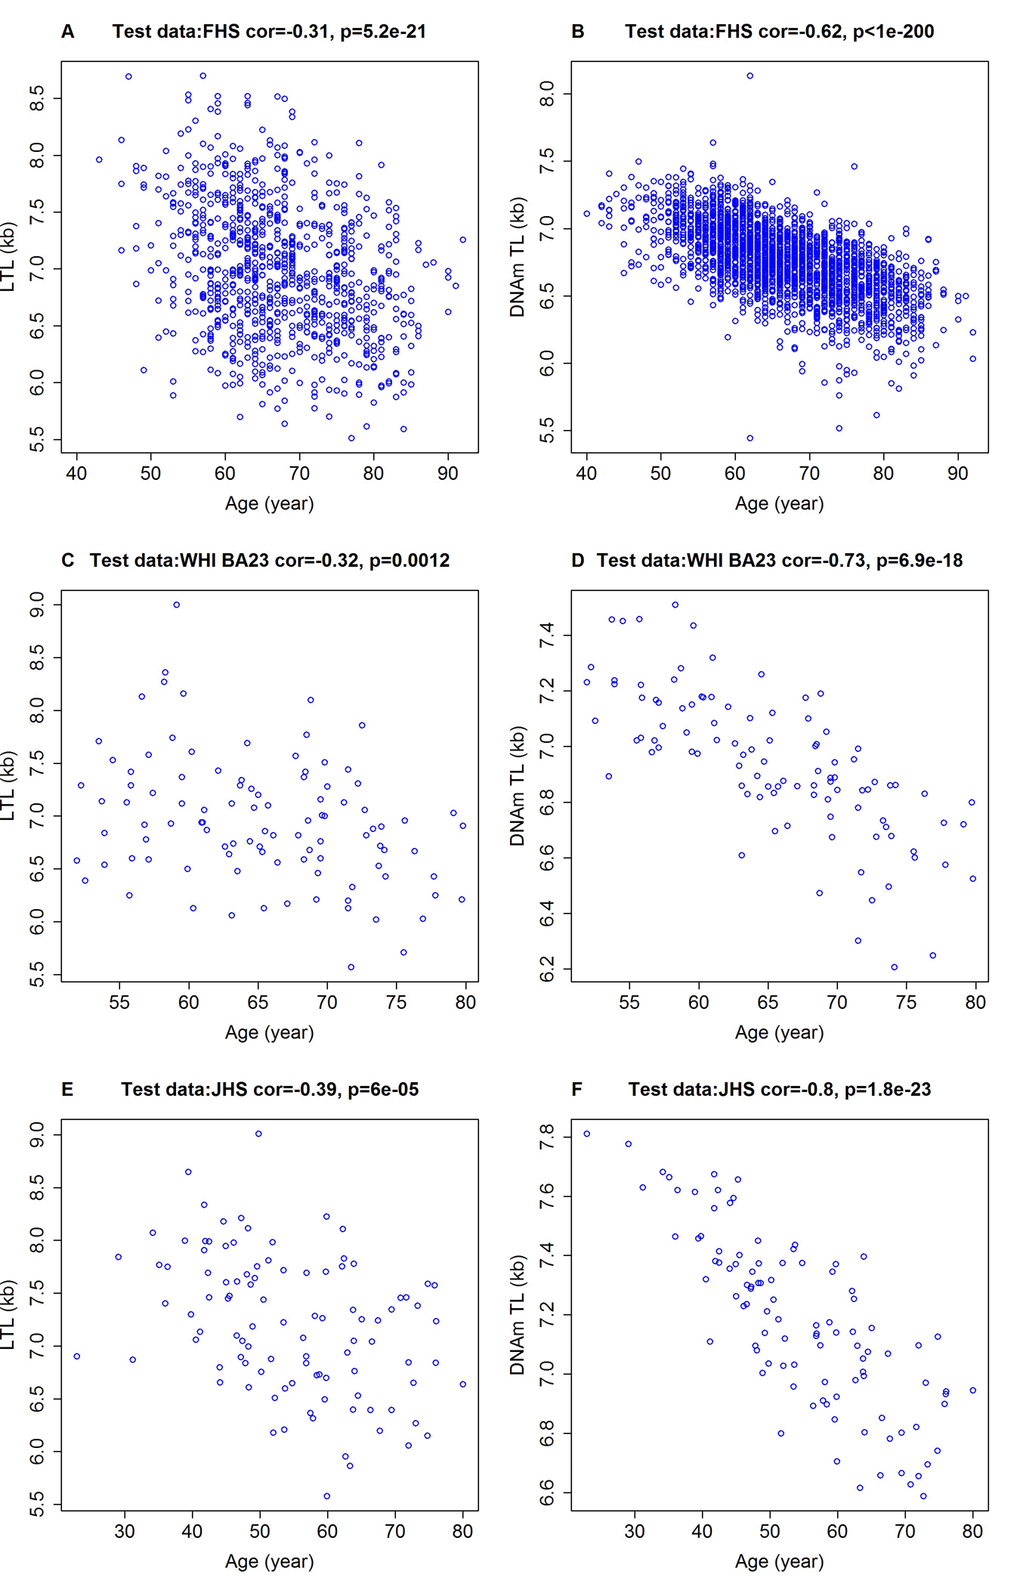 Chronological age versus measured LTL and DNAmTL. Chronological age versus measured LTL (panels A, C, E, in units of kilobase [kb]) and DNAmTL (panels B, D, F, in units of kb). (A, B) Test data from the FHS. (C, D) Test data from the WHI (N=100), (E, F) Test data from the JHS (N=100). Each panel reports a Pearson correlation coefficient and correlation test p-value.